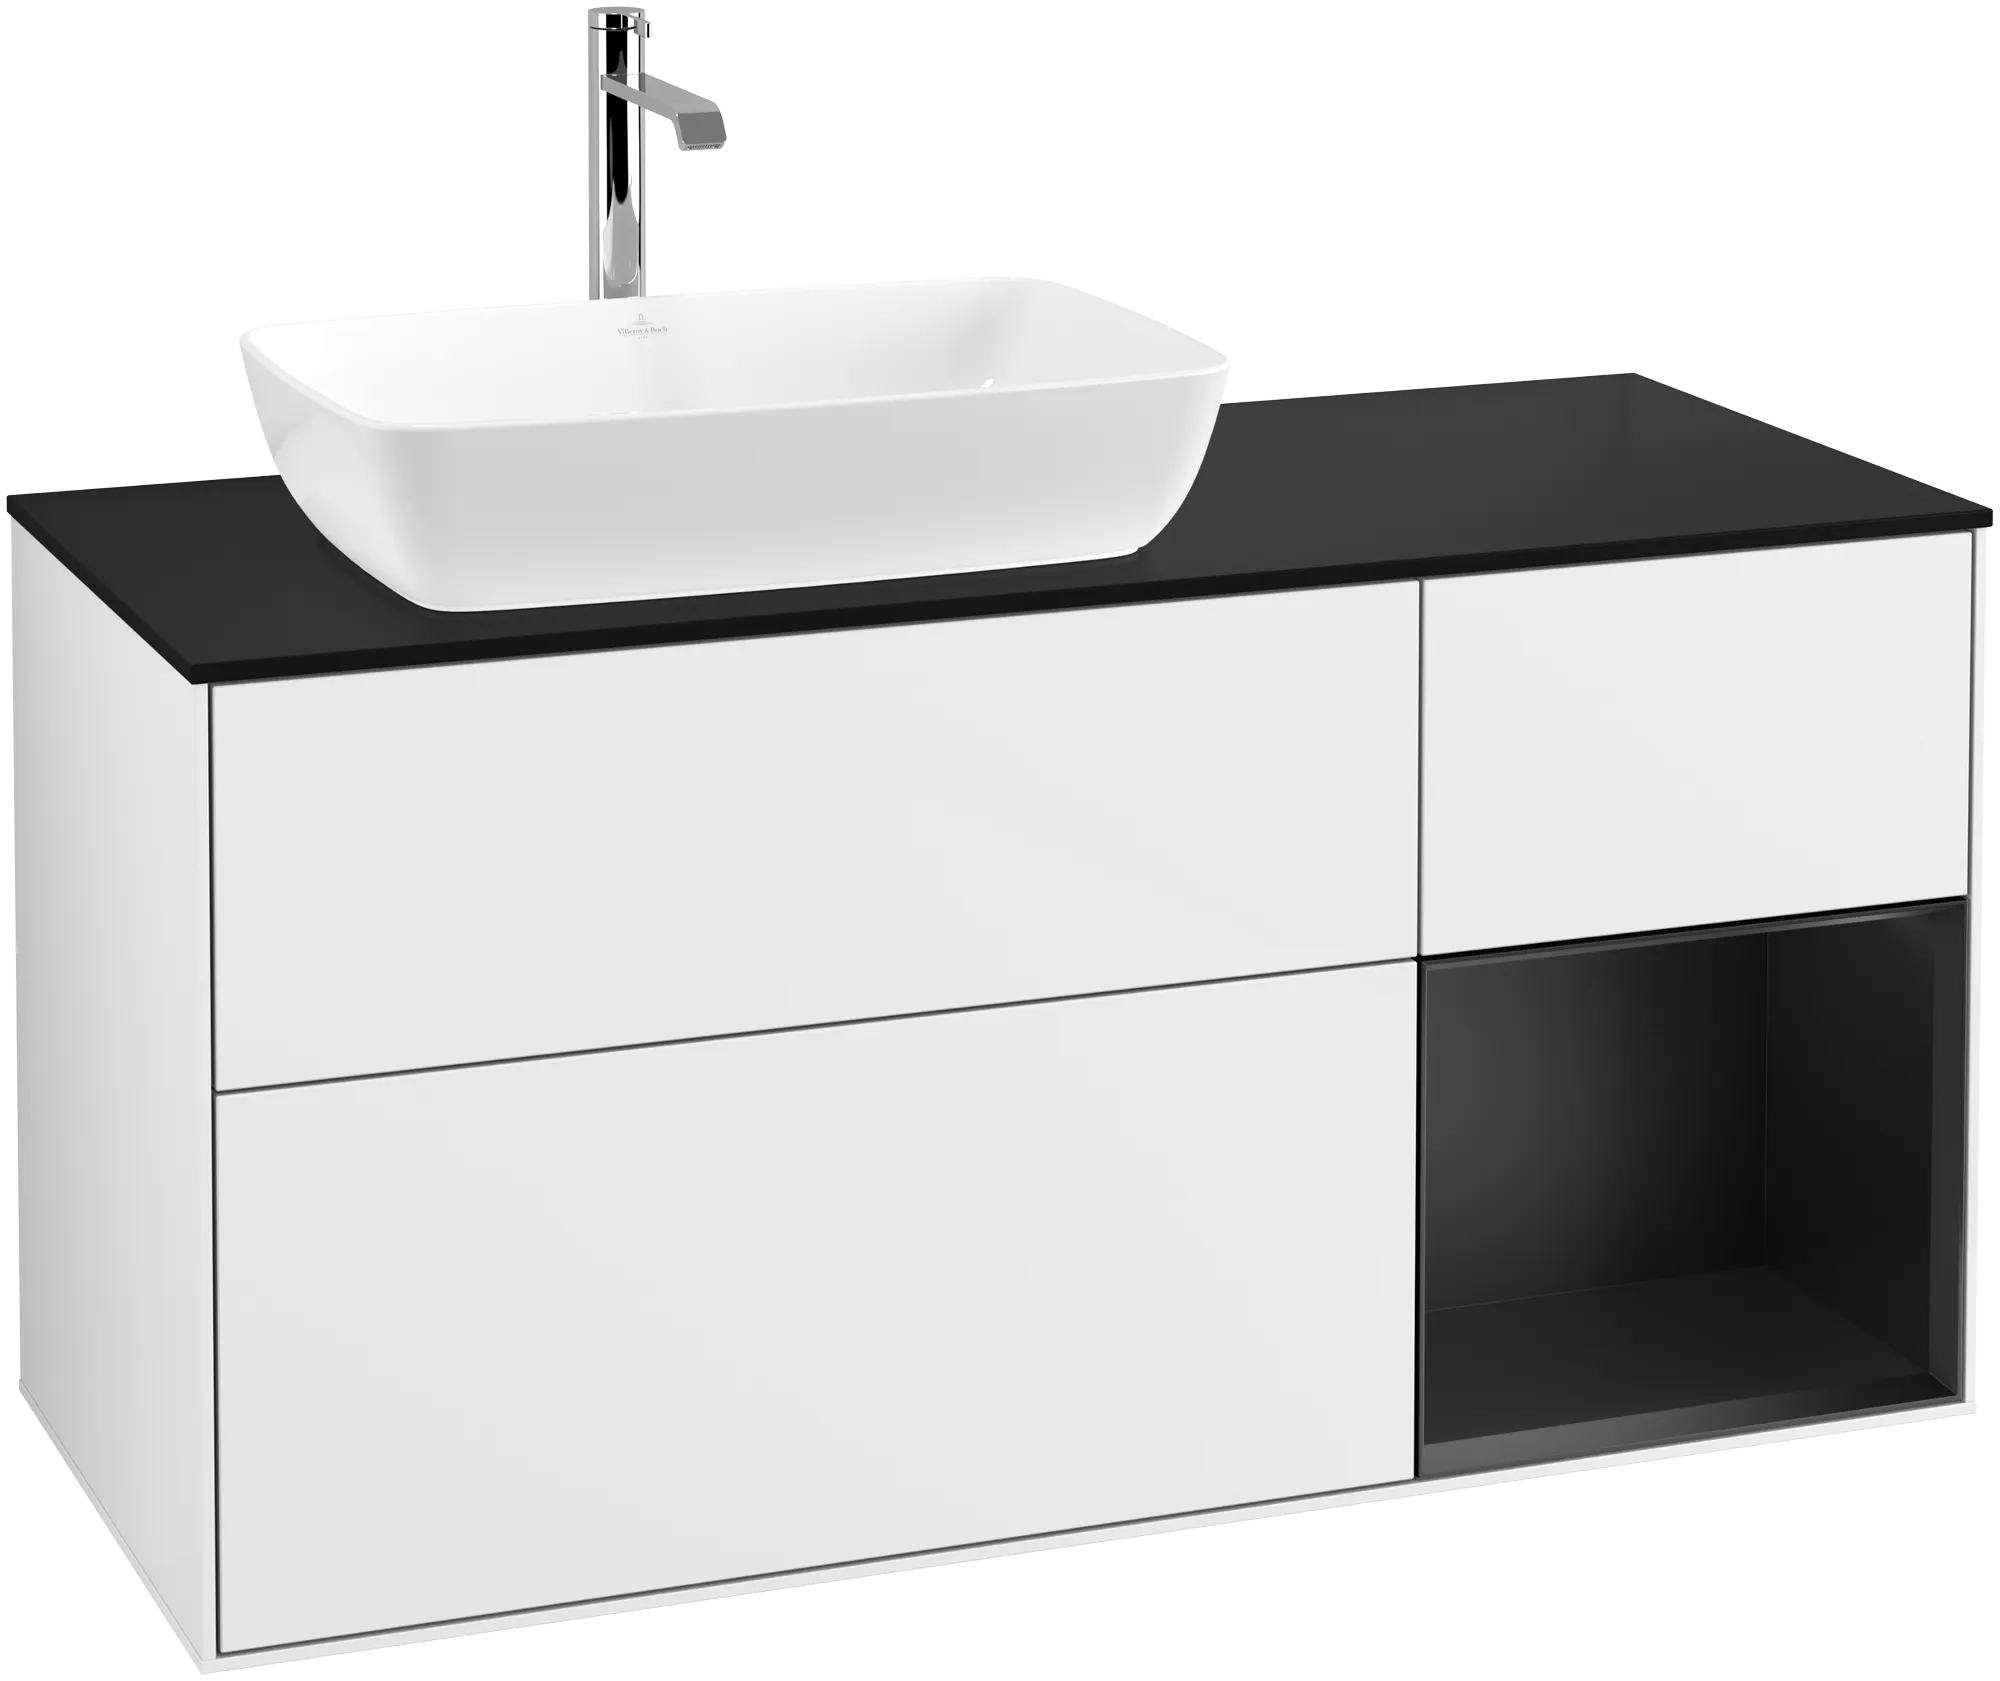 Picture of VILLEROY BOCH Finion Vanity unit, with lighting, 3 pull-out compartments, 1200 x 603 x 501 mm, Glossy White Lacquer / Black Matt Lacquer / Glass Black Matt #G812PDGF